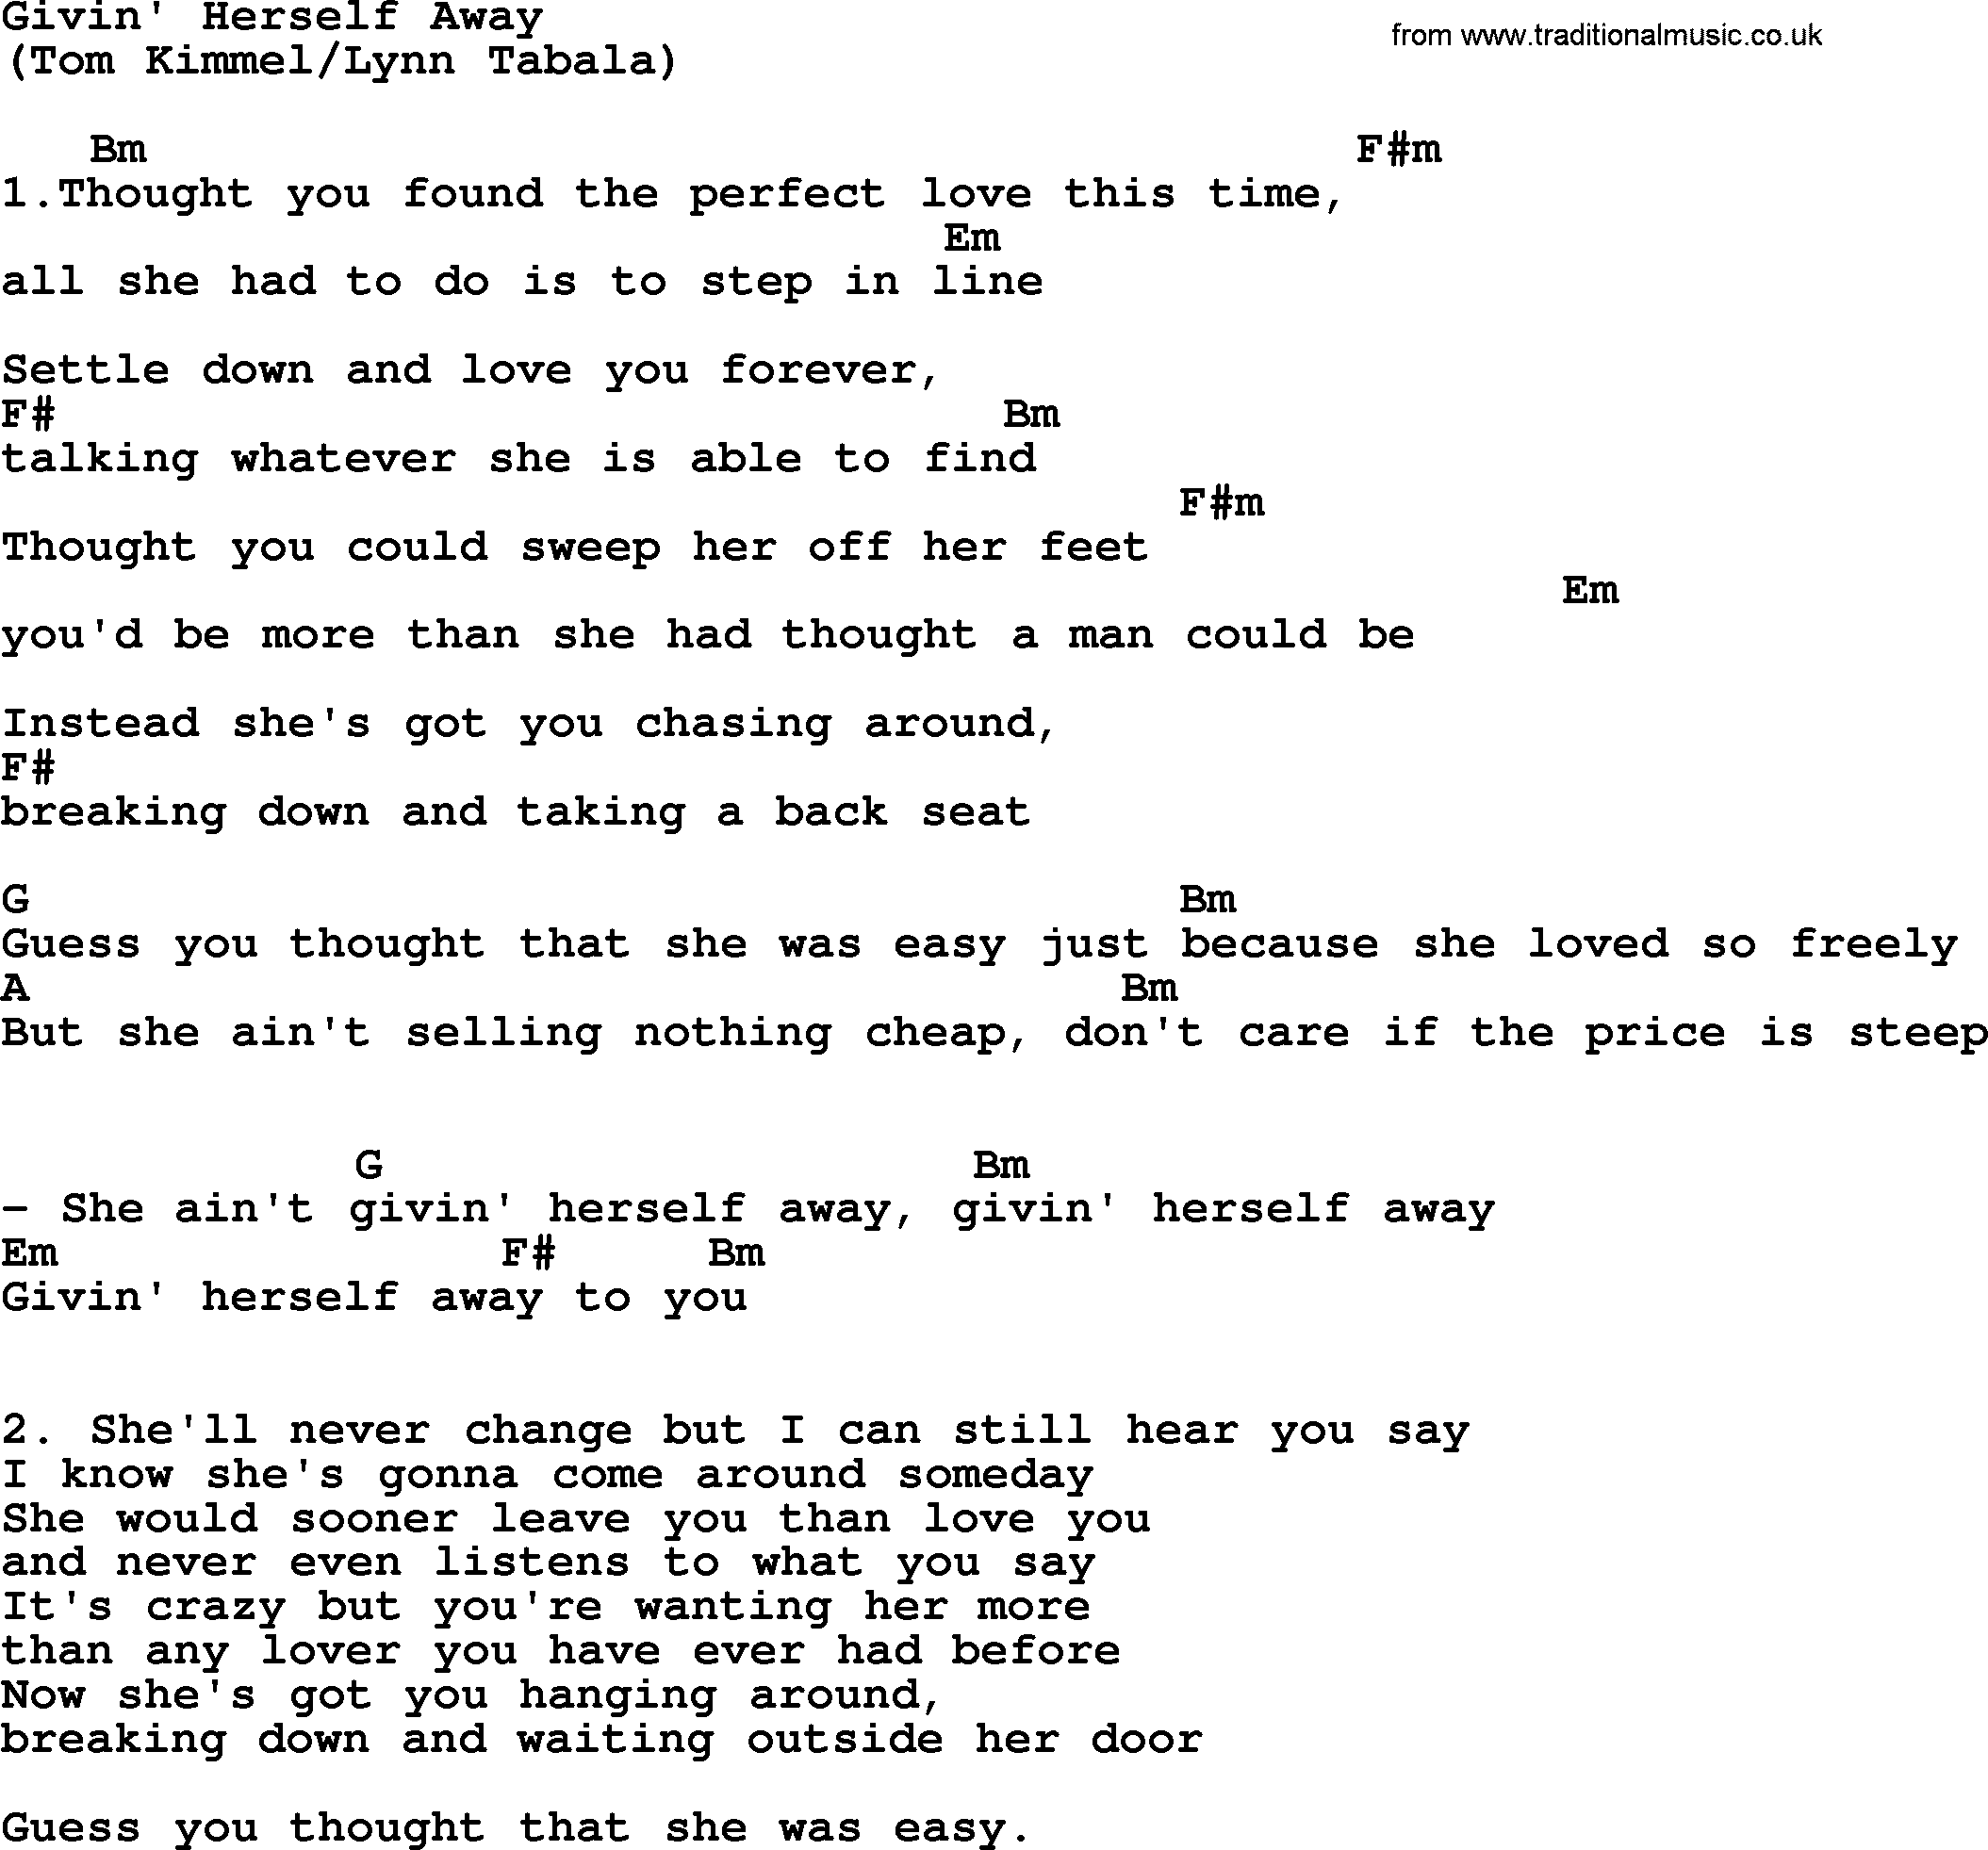 The Byrds song Givin' Herself Away, lyrics and chords